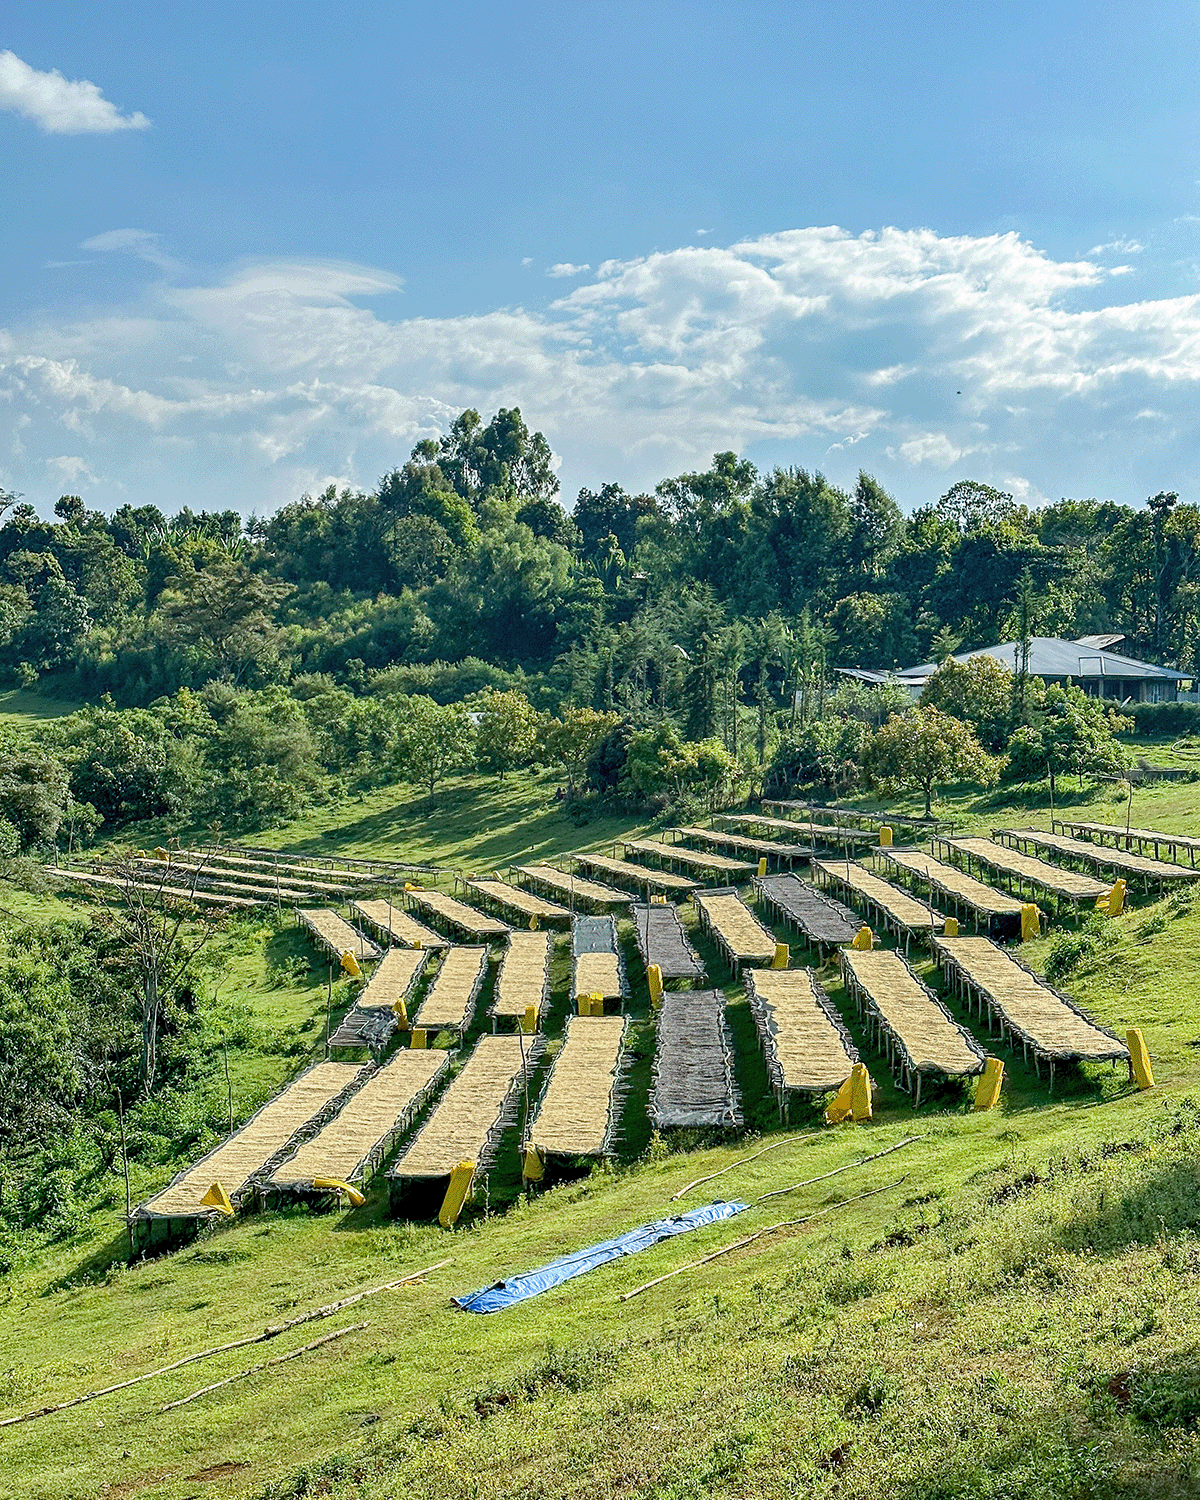 A photo of the farm where these coffee beans were grown, showing drying beds for the coffee.